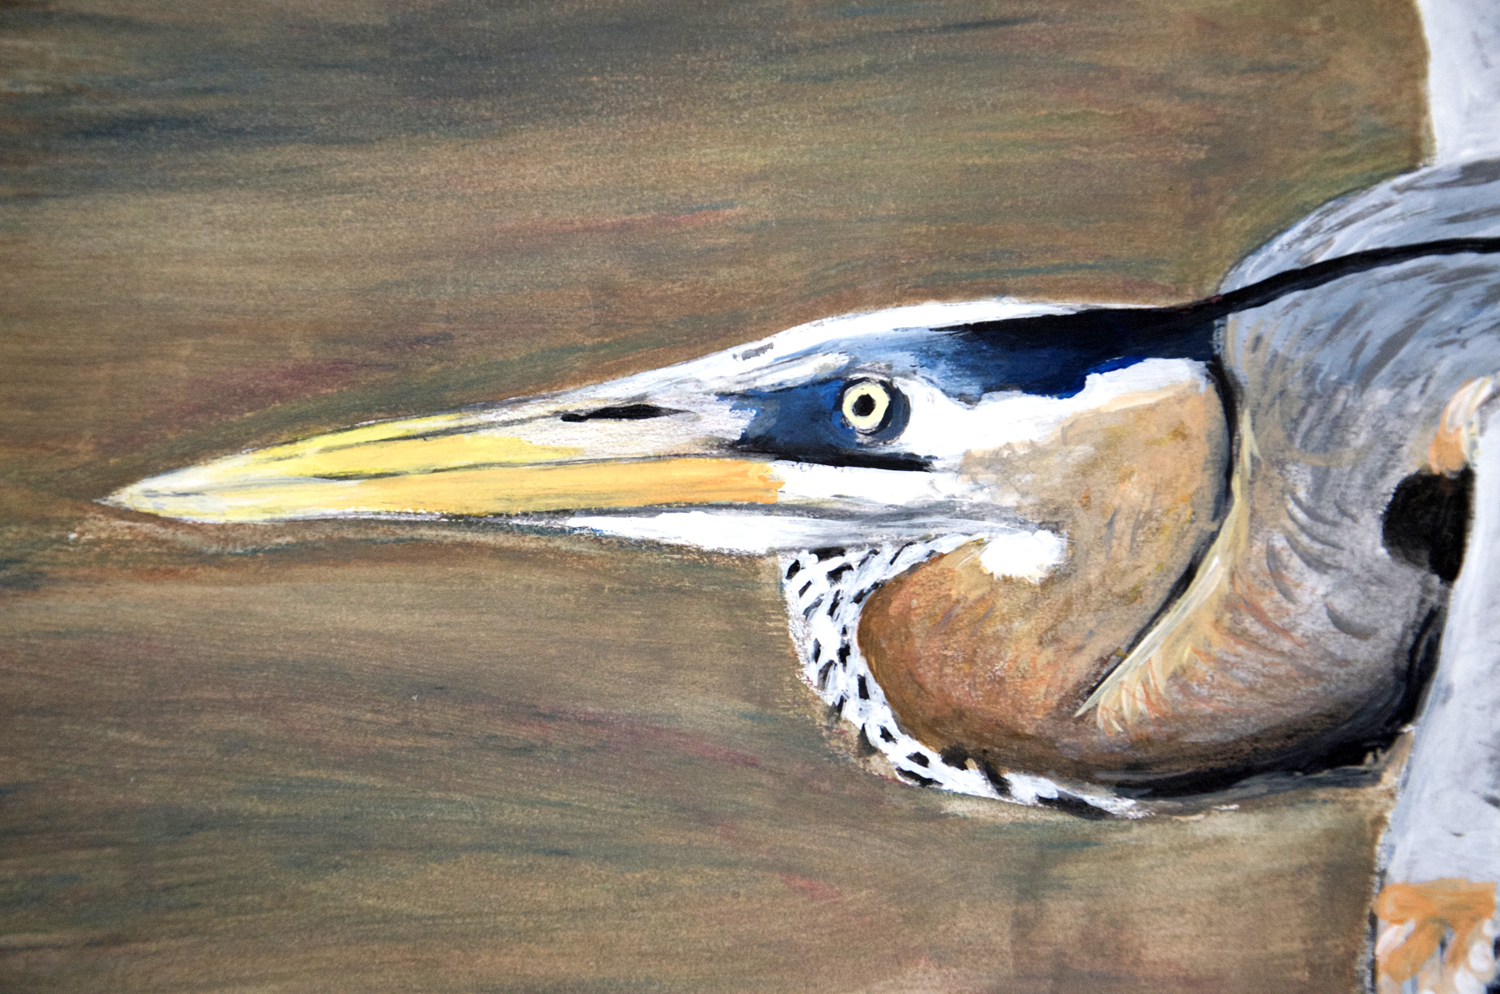 Great Blue Heron oil pastel and acrylic painting, by Billy Reiter